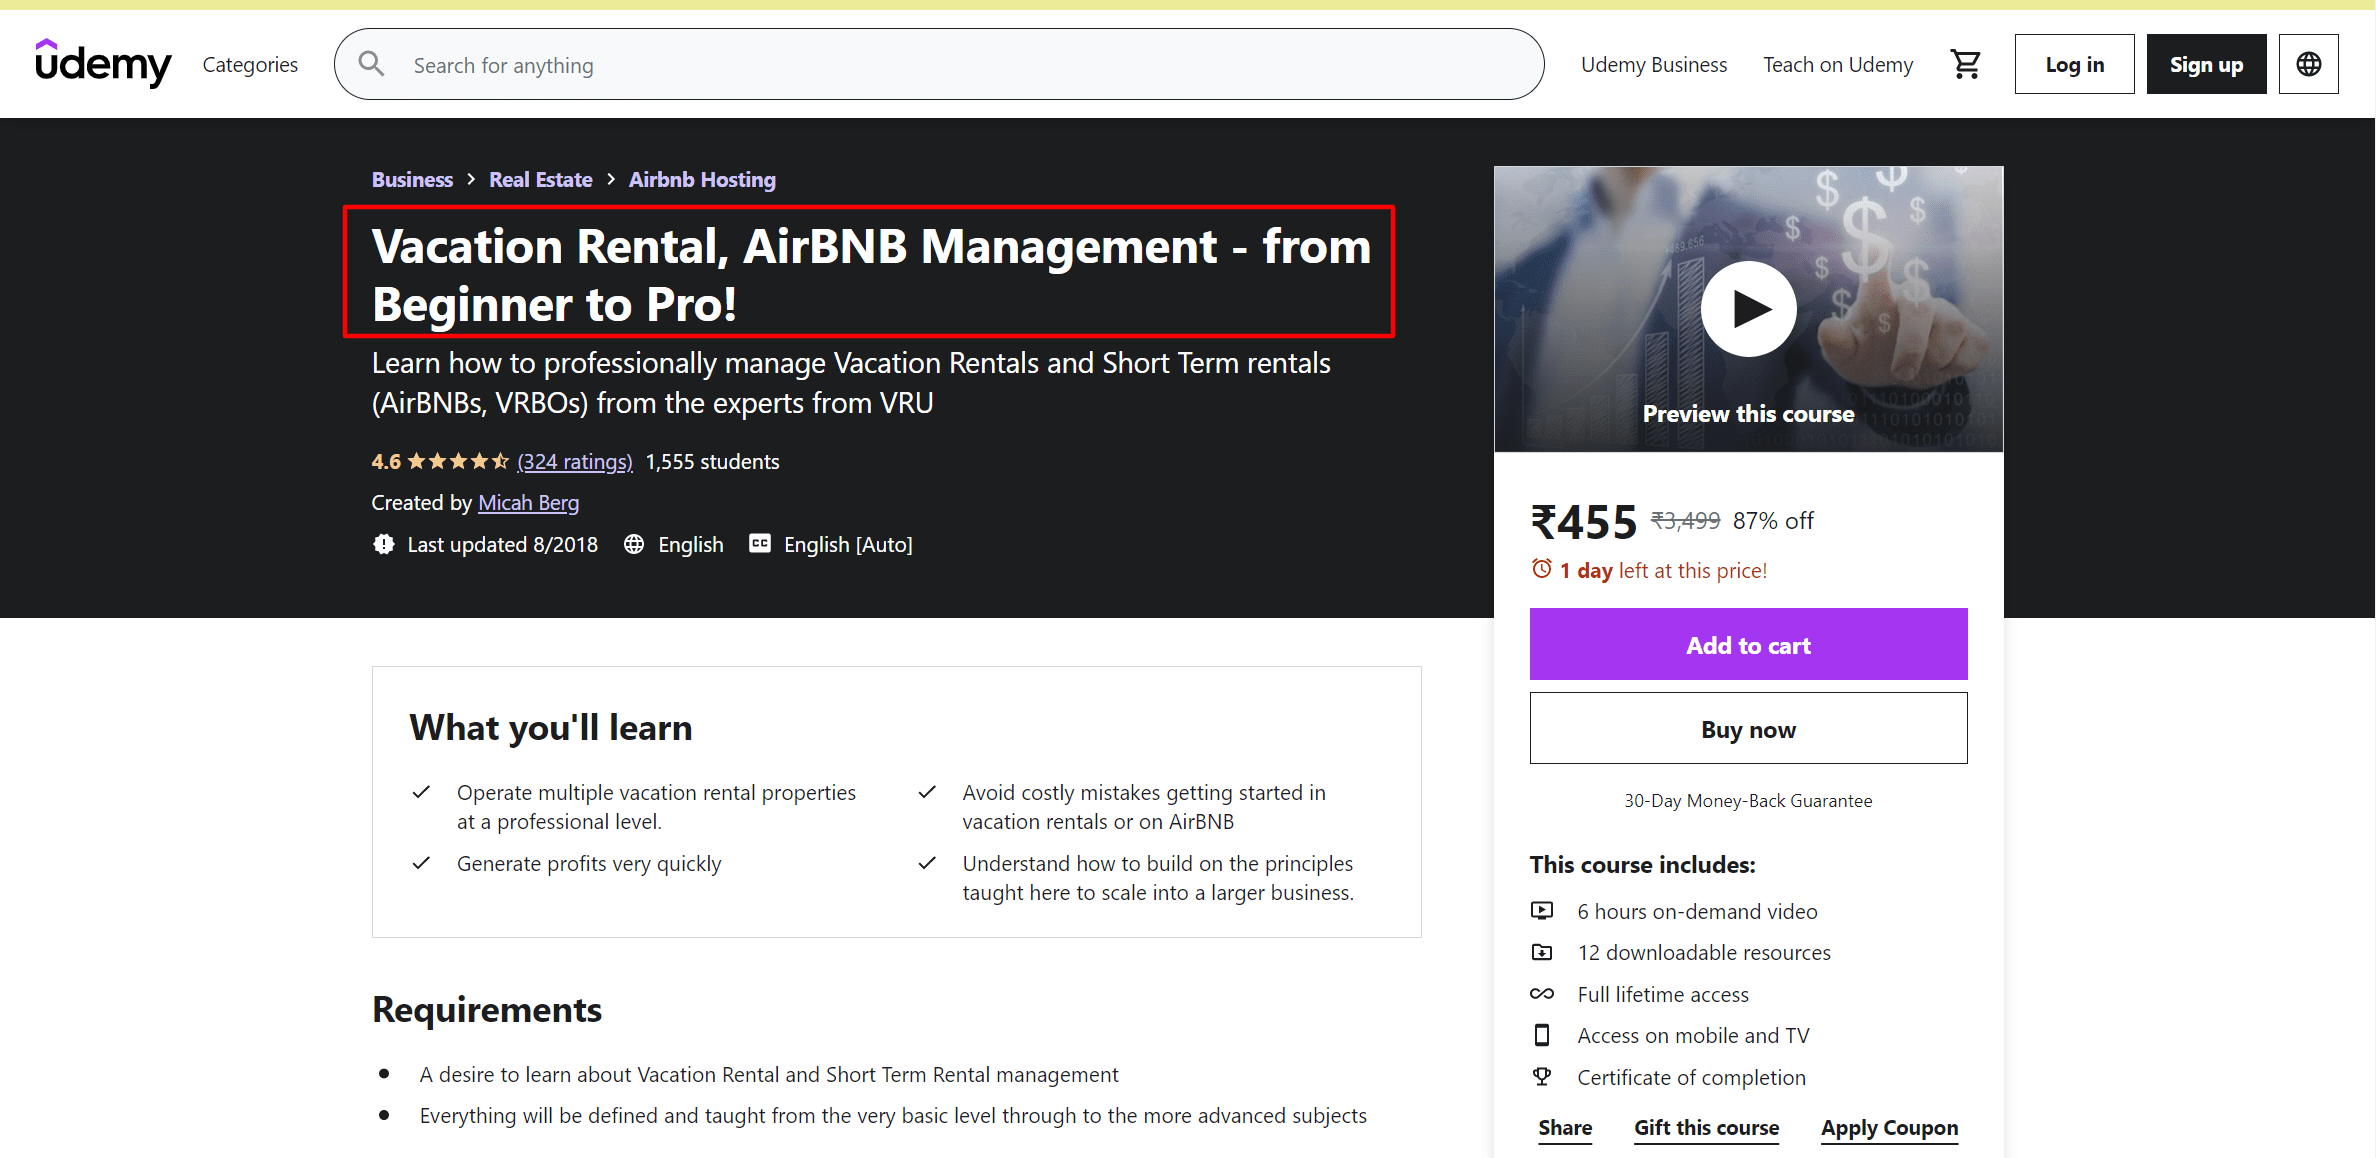 Vacation Rental, AirBNB Management from Beginner to Pro